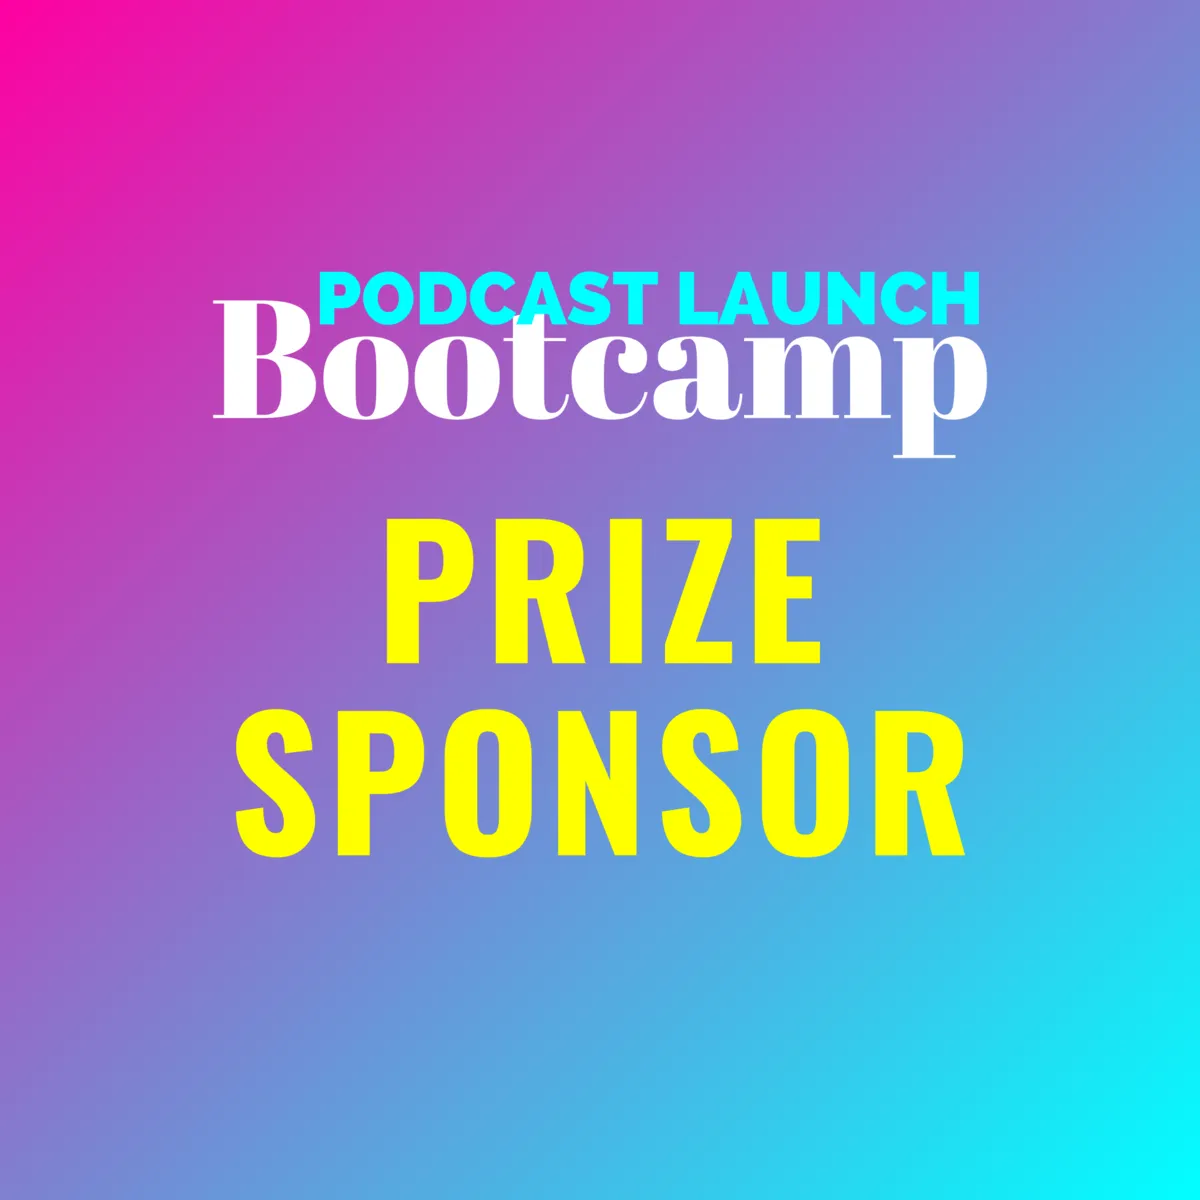 Prize Sponsor: Podcast Launch Bootcamp